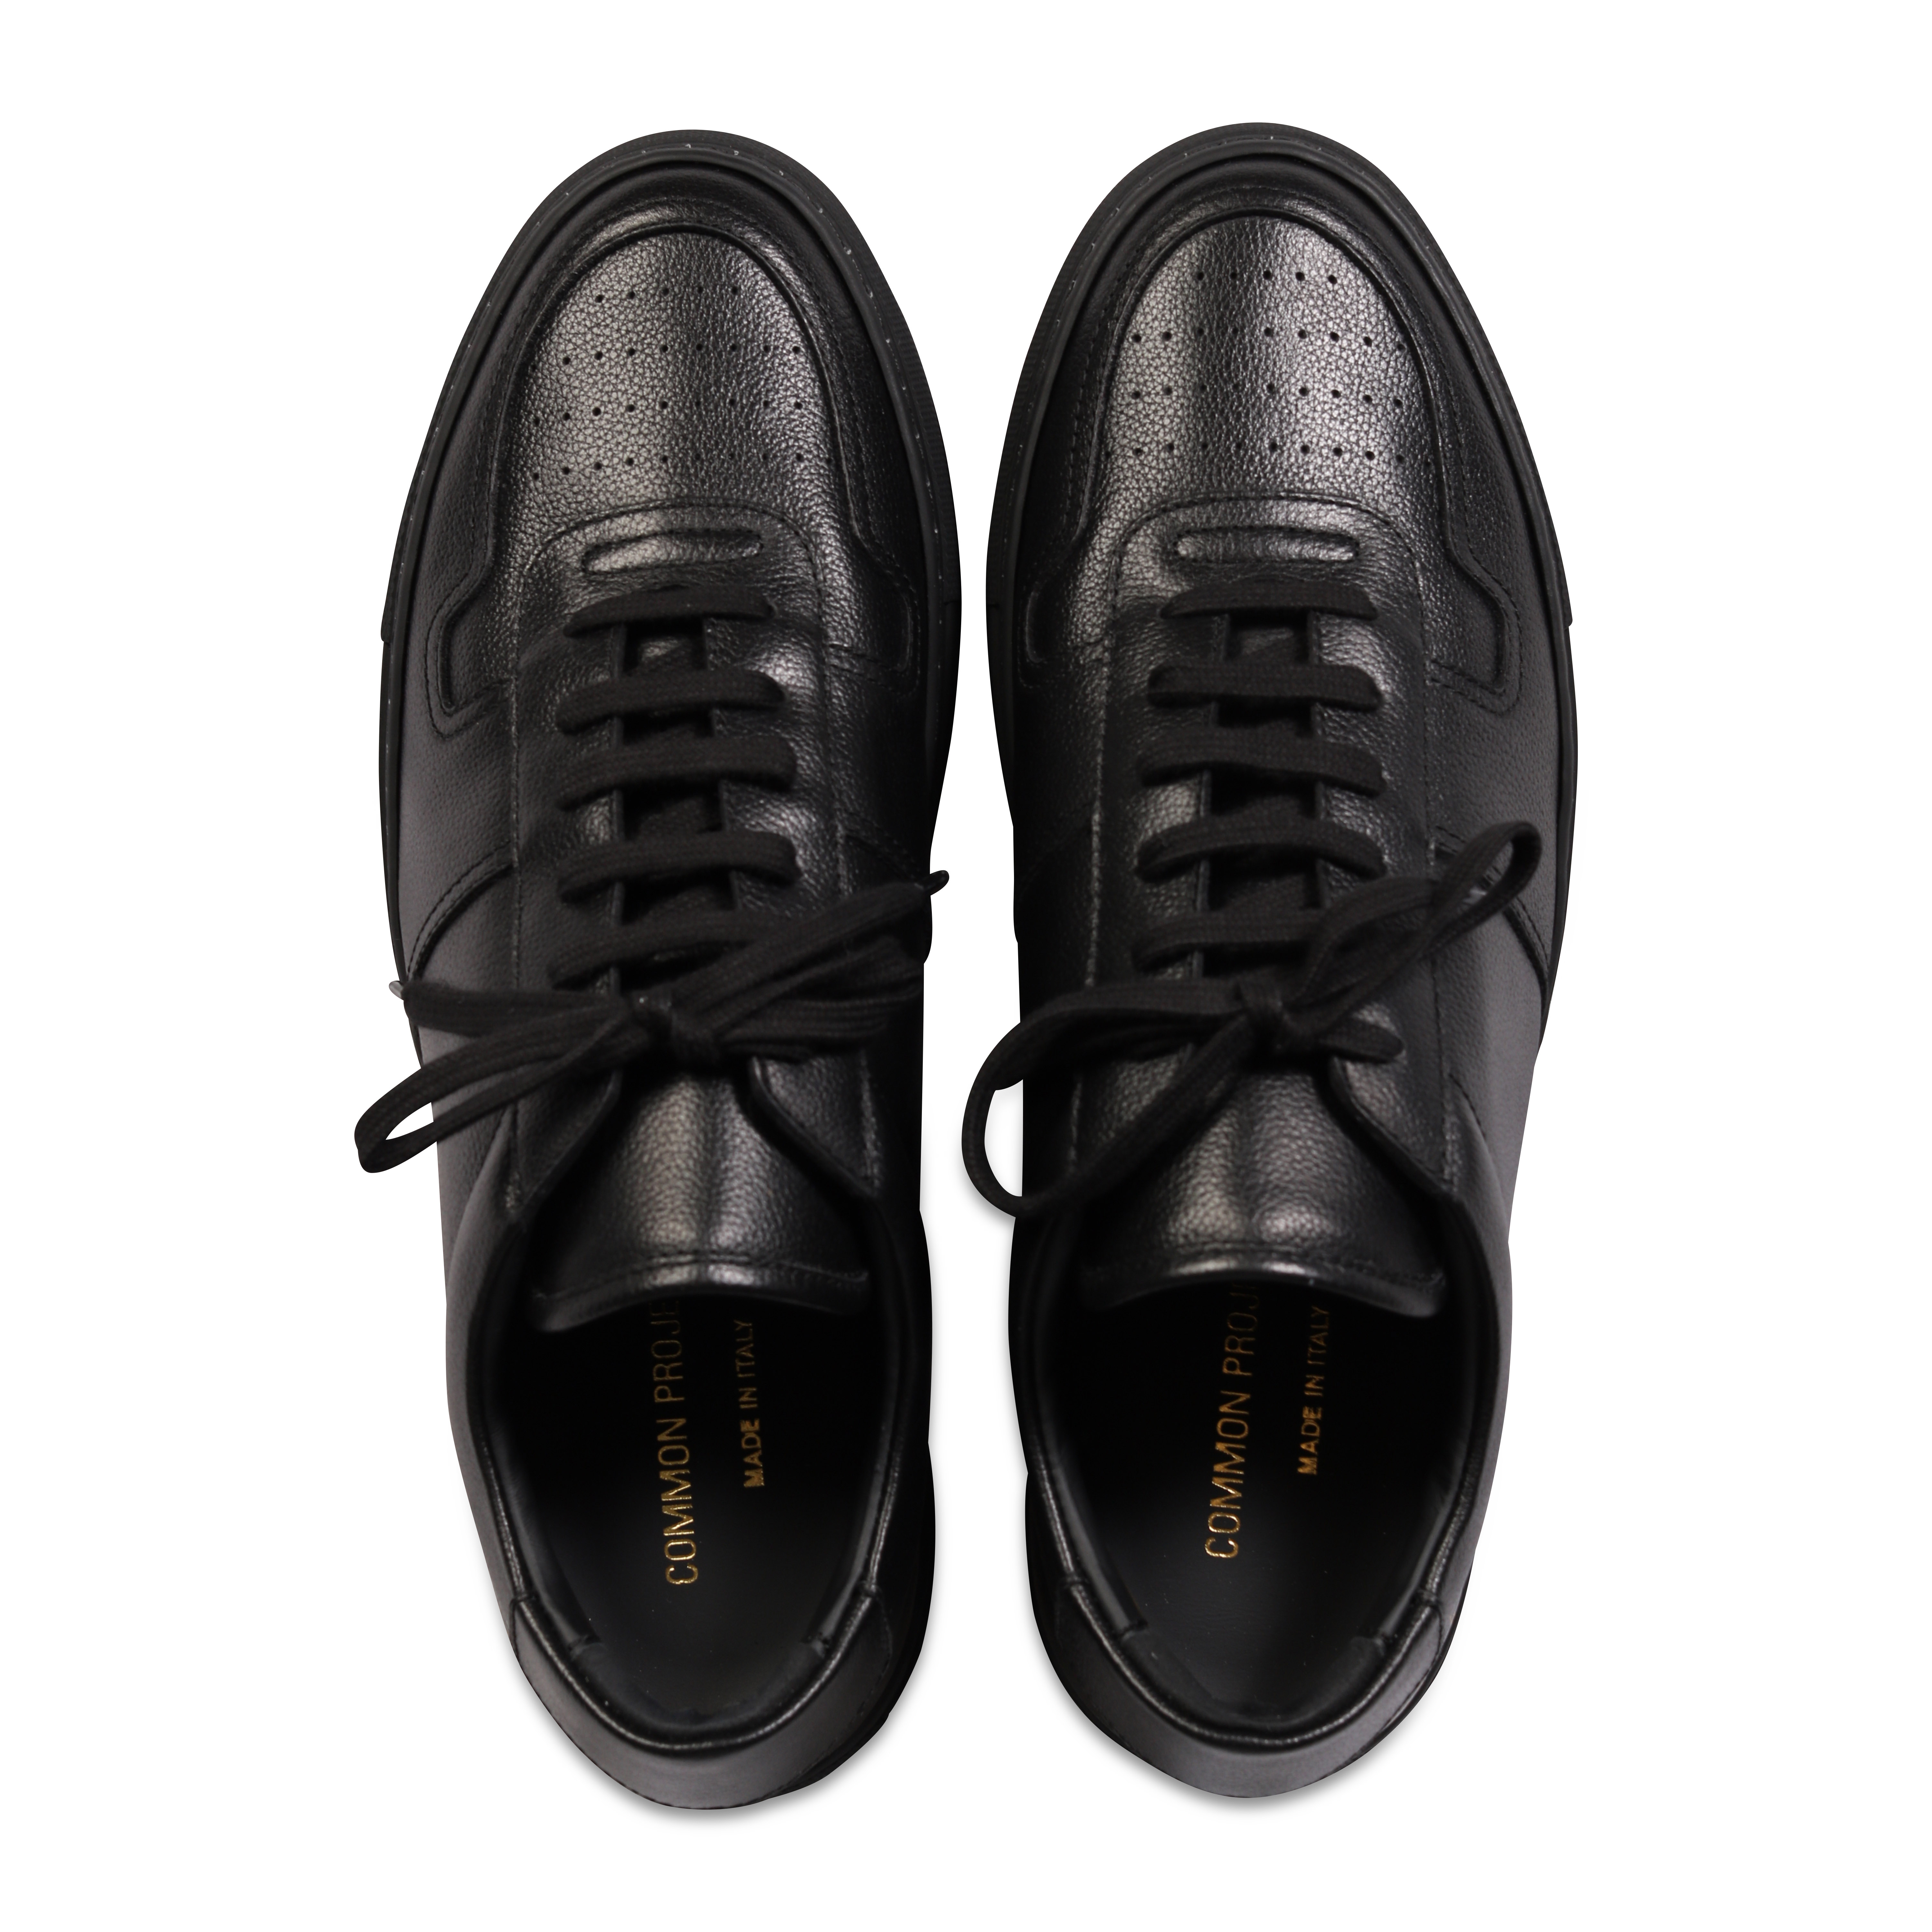 Common Projects Sneaker Bball Low Bumpy